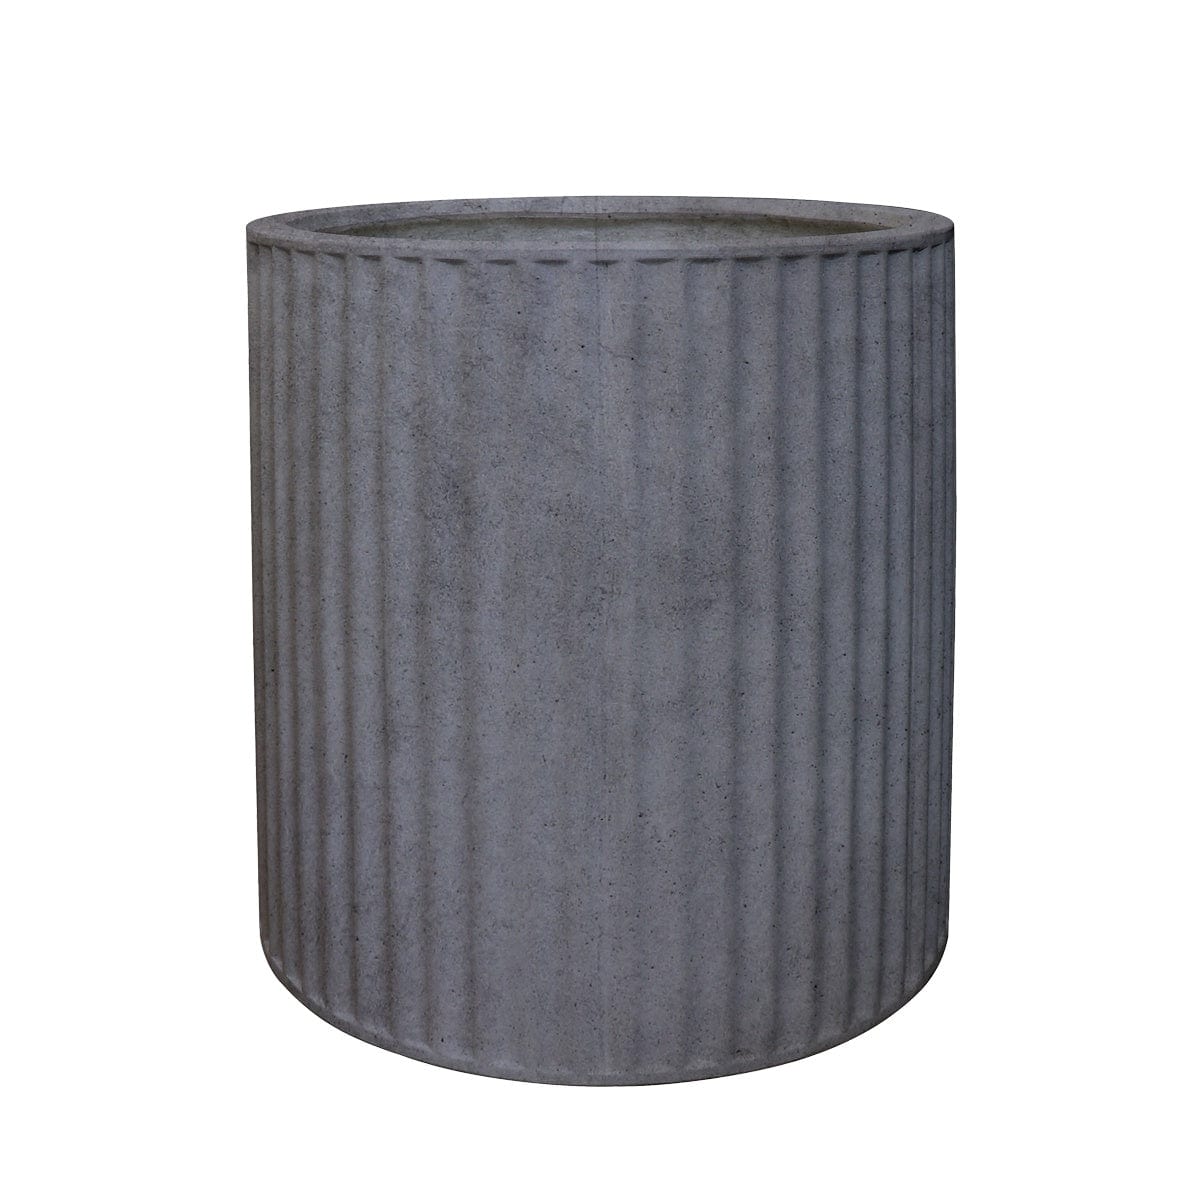 Piako Ribbed Cylinder Planter Medium - Weathered Cement PRE ORDER